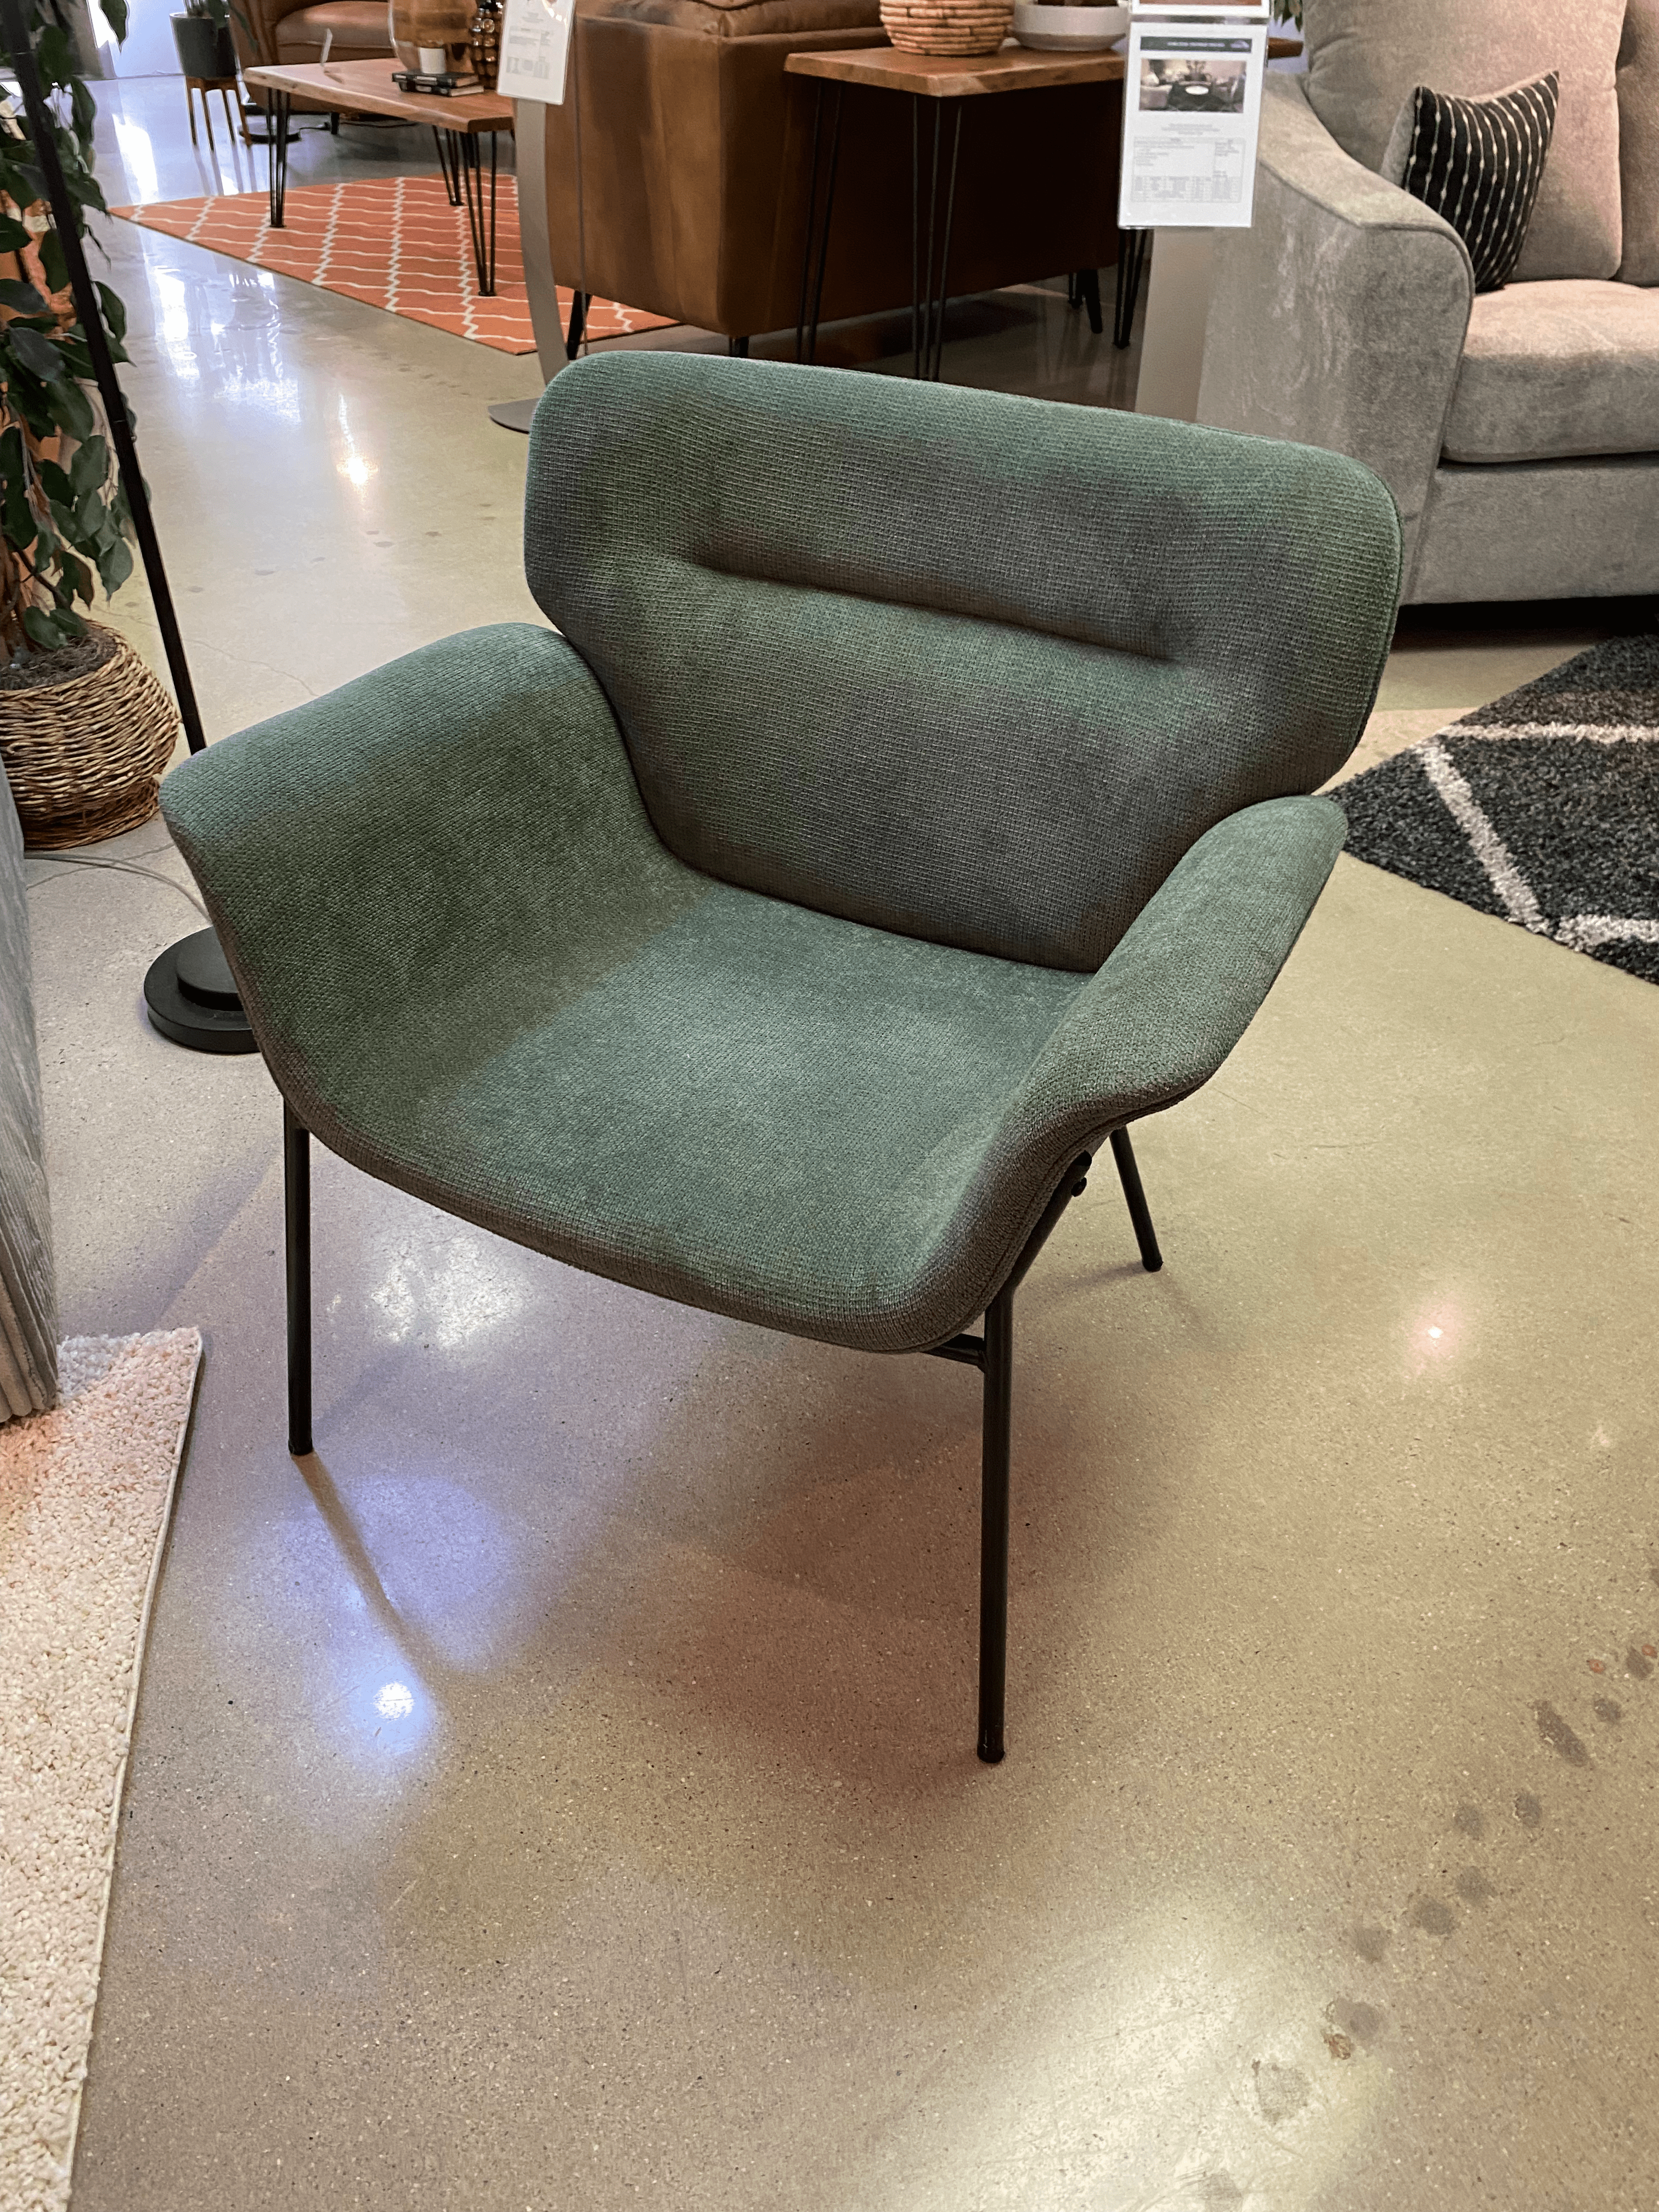 Image of textured upholstery accent chair from High Point Market